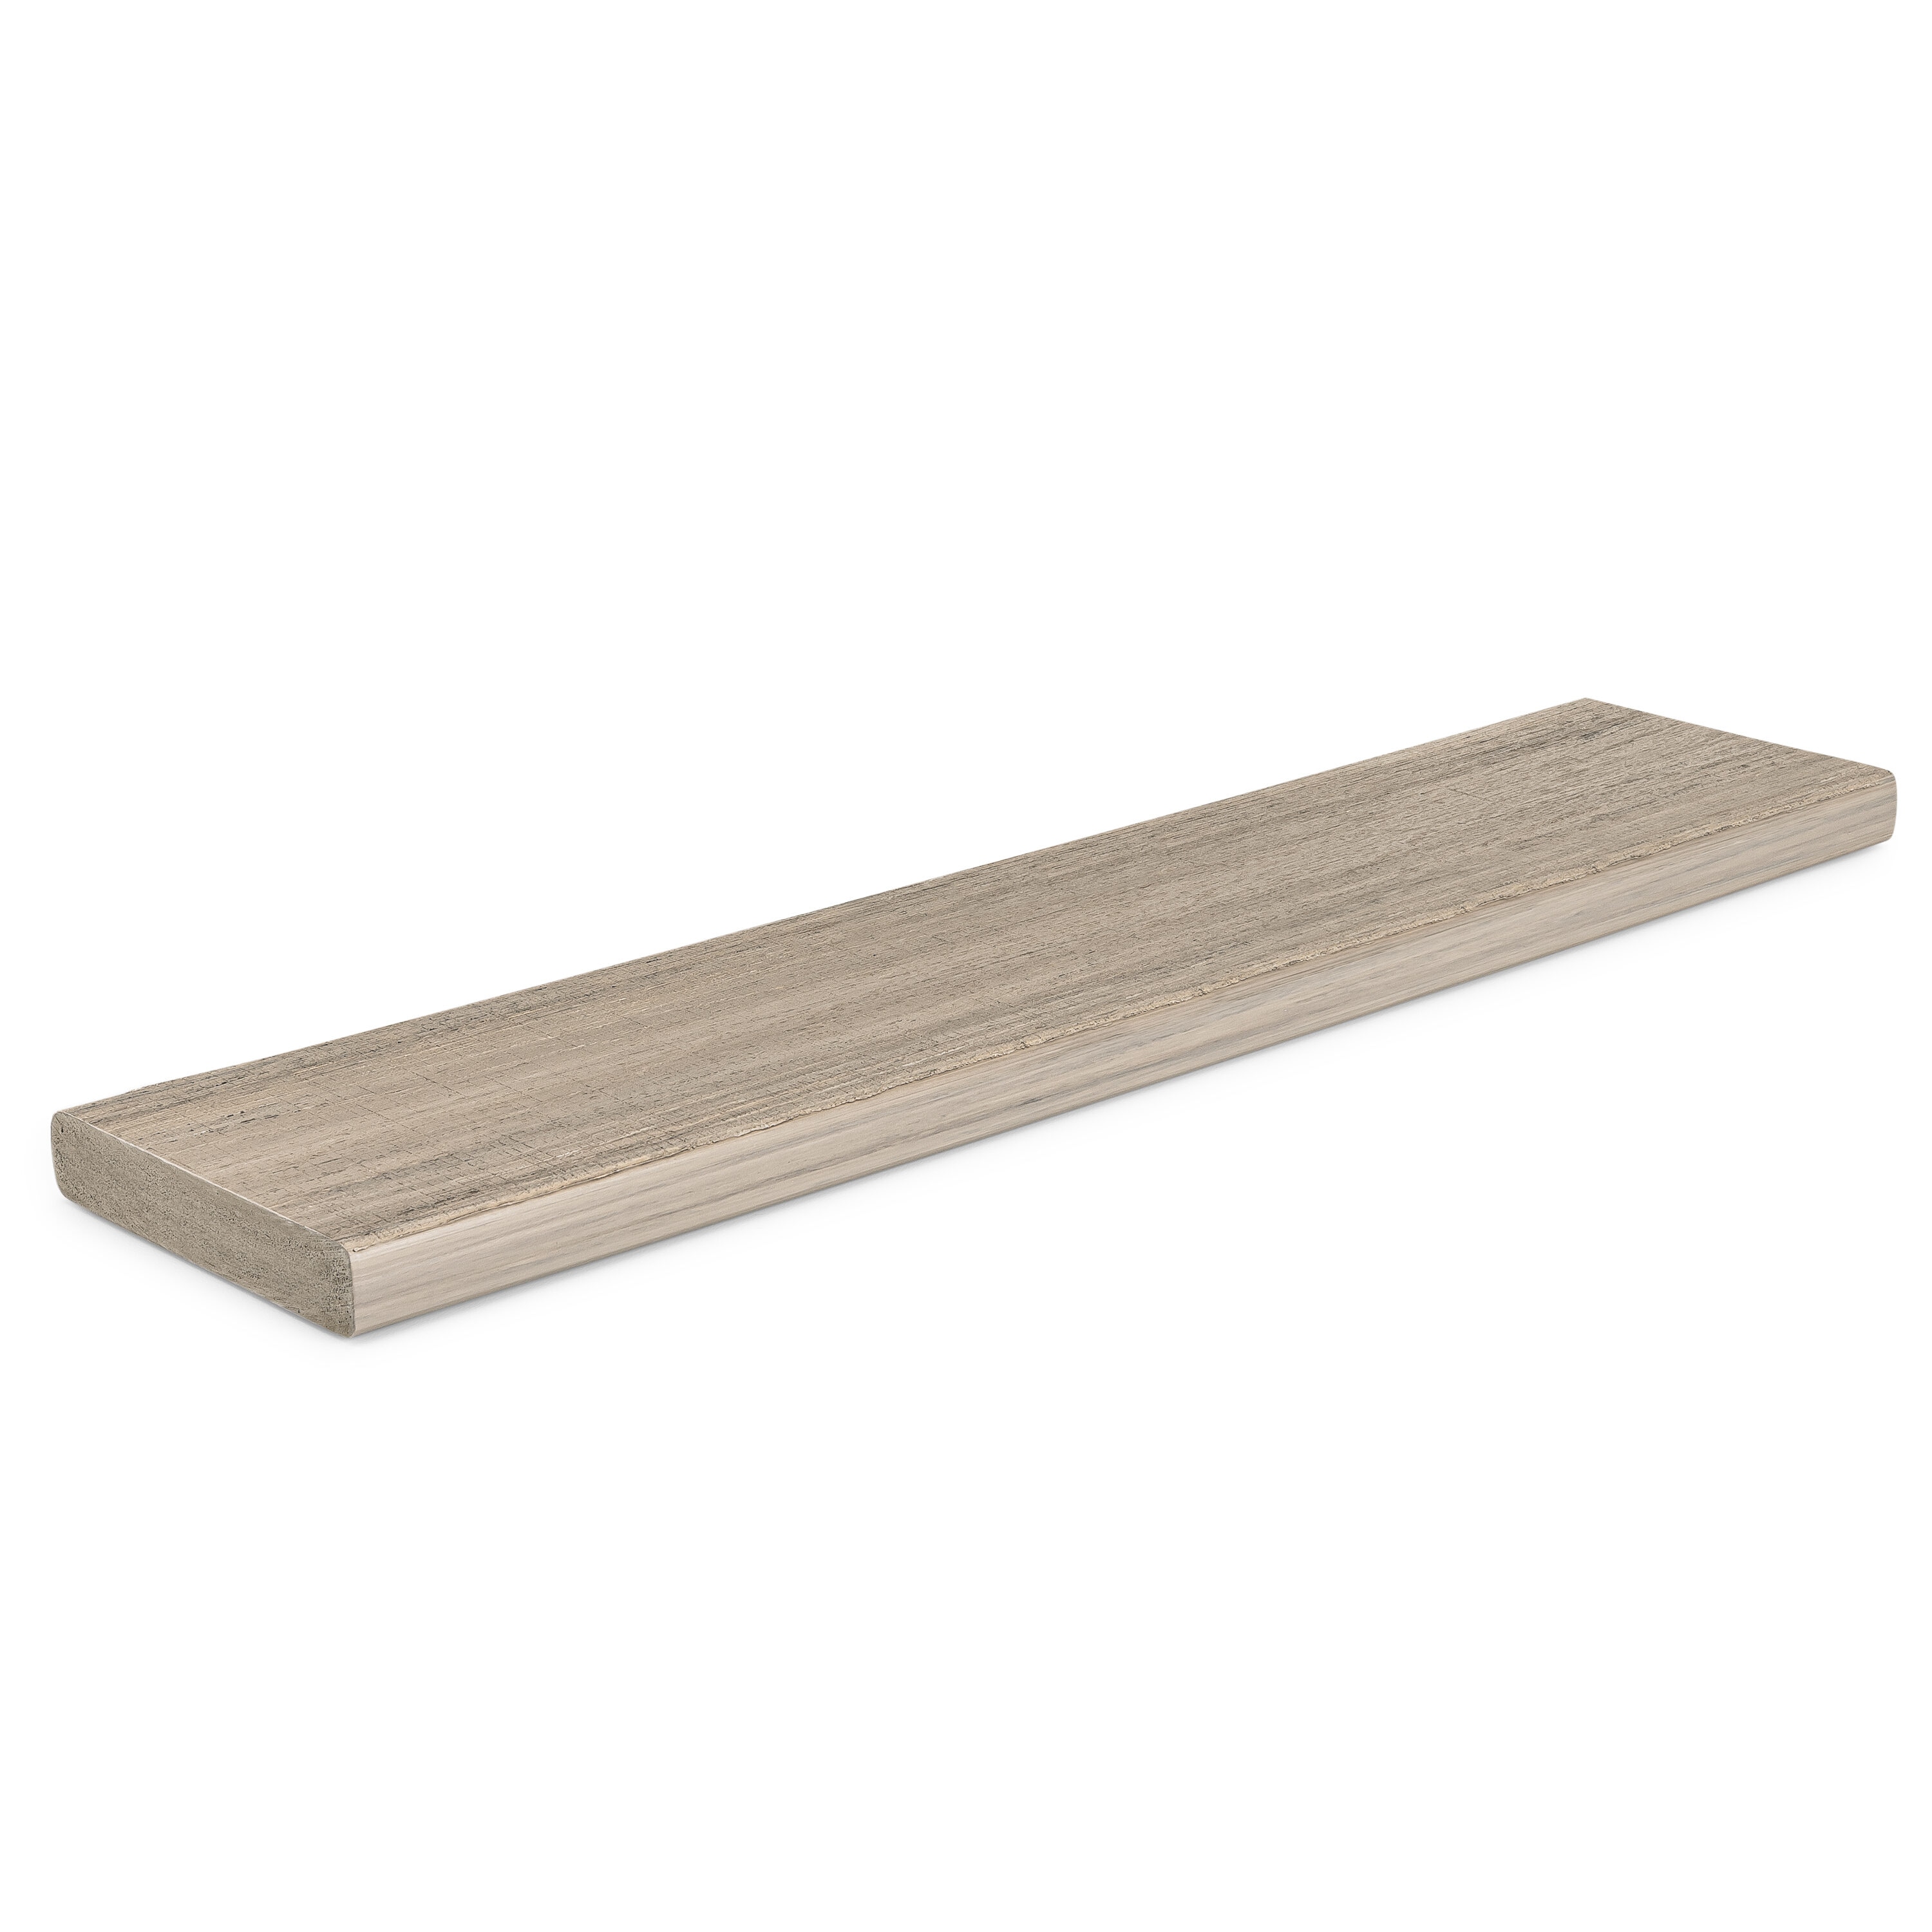 Landmark 5/4-in x 6-in x 20-ft French White Oak Square Composite Deck Board in Brown/Tan | - TimberTech ADB15520FW